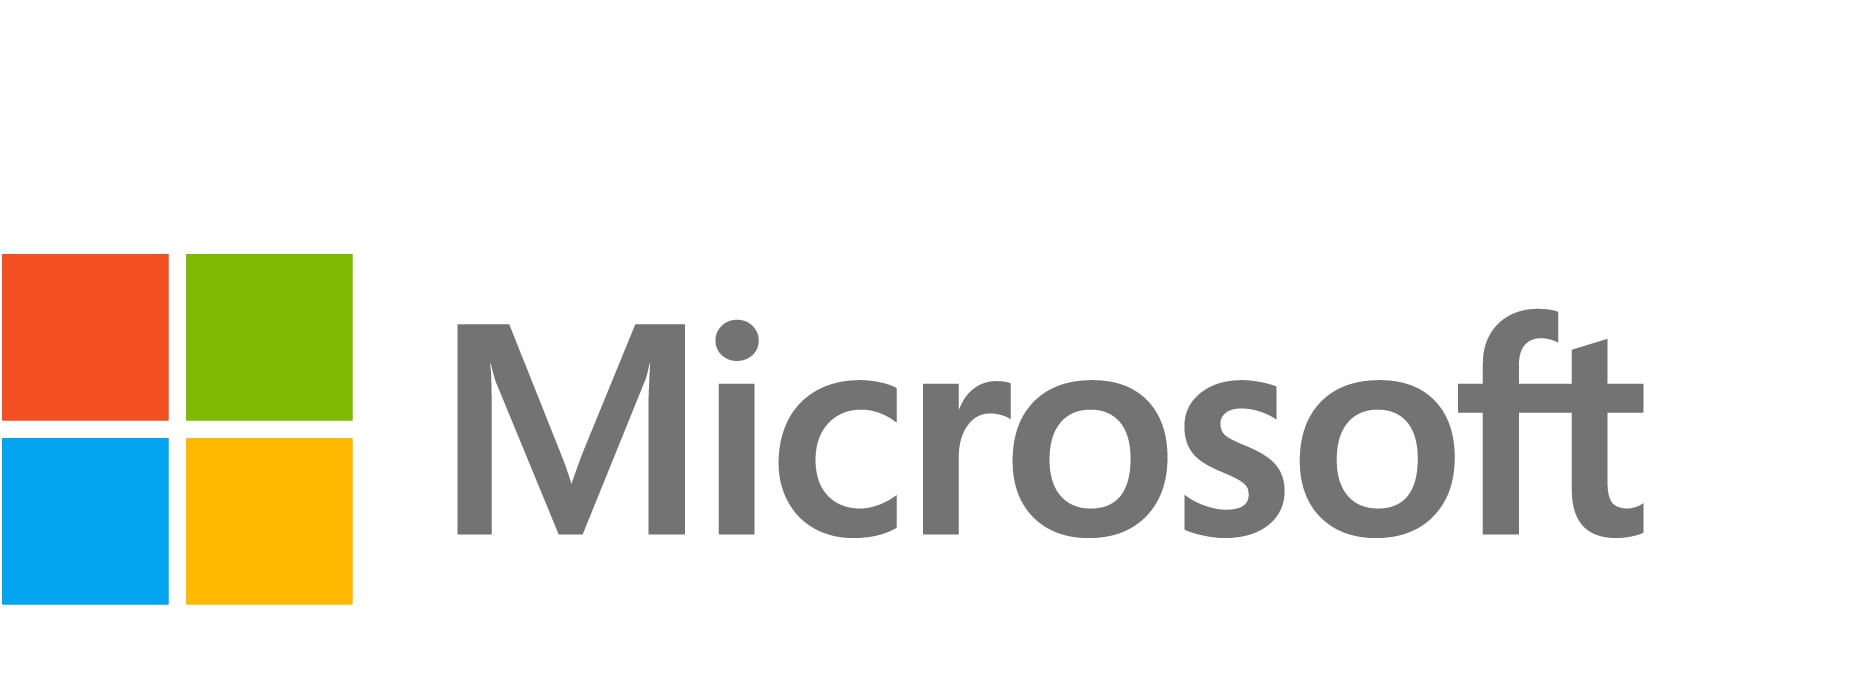 Microsoft Power Pages - subscription license (1 year) - 500 anonymous users